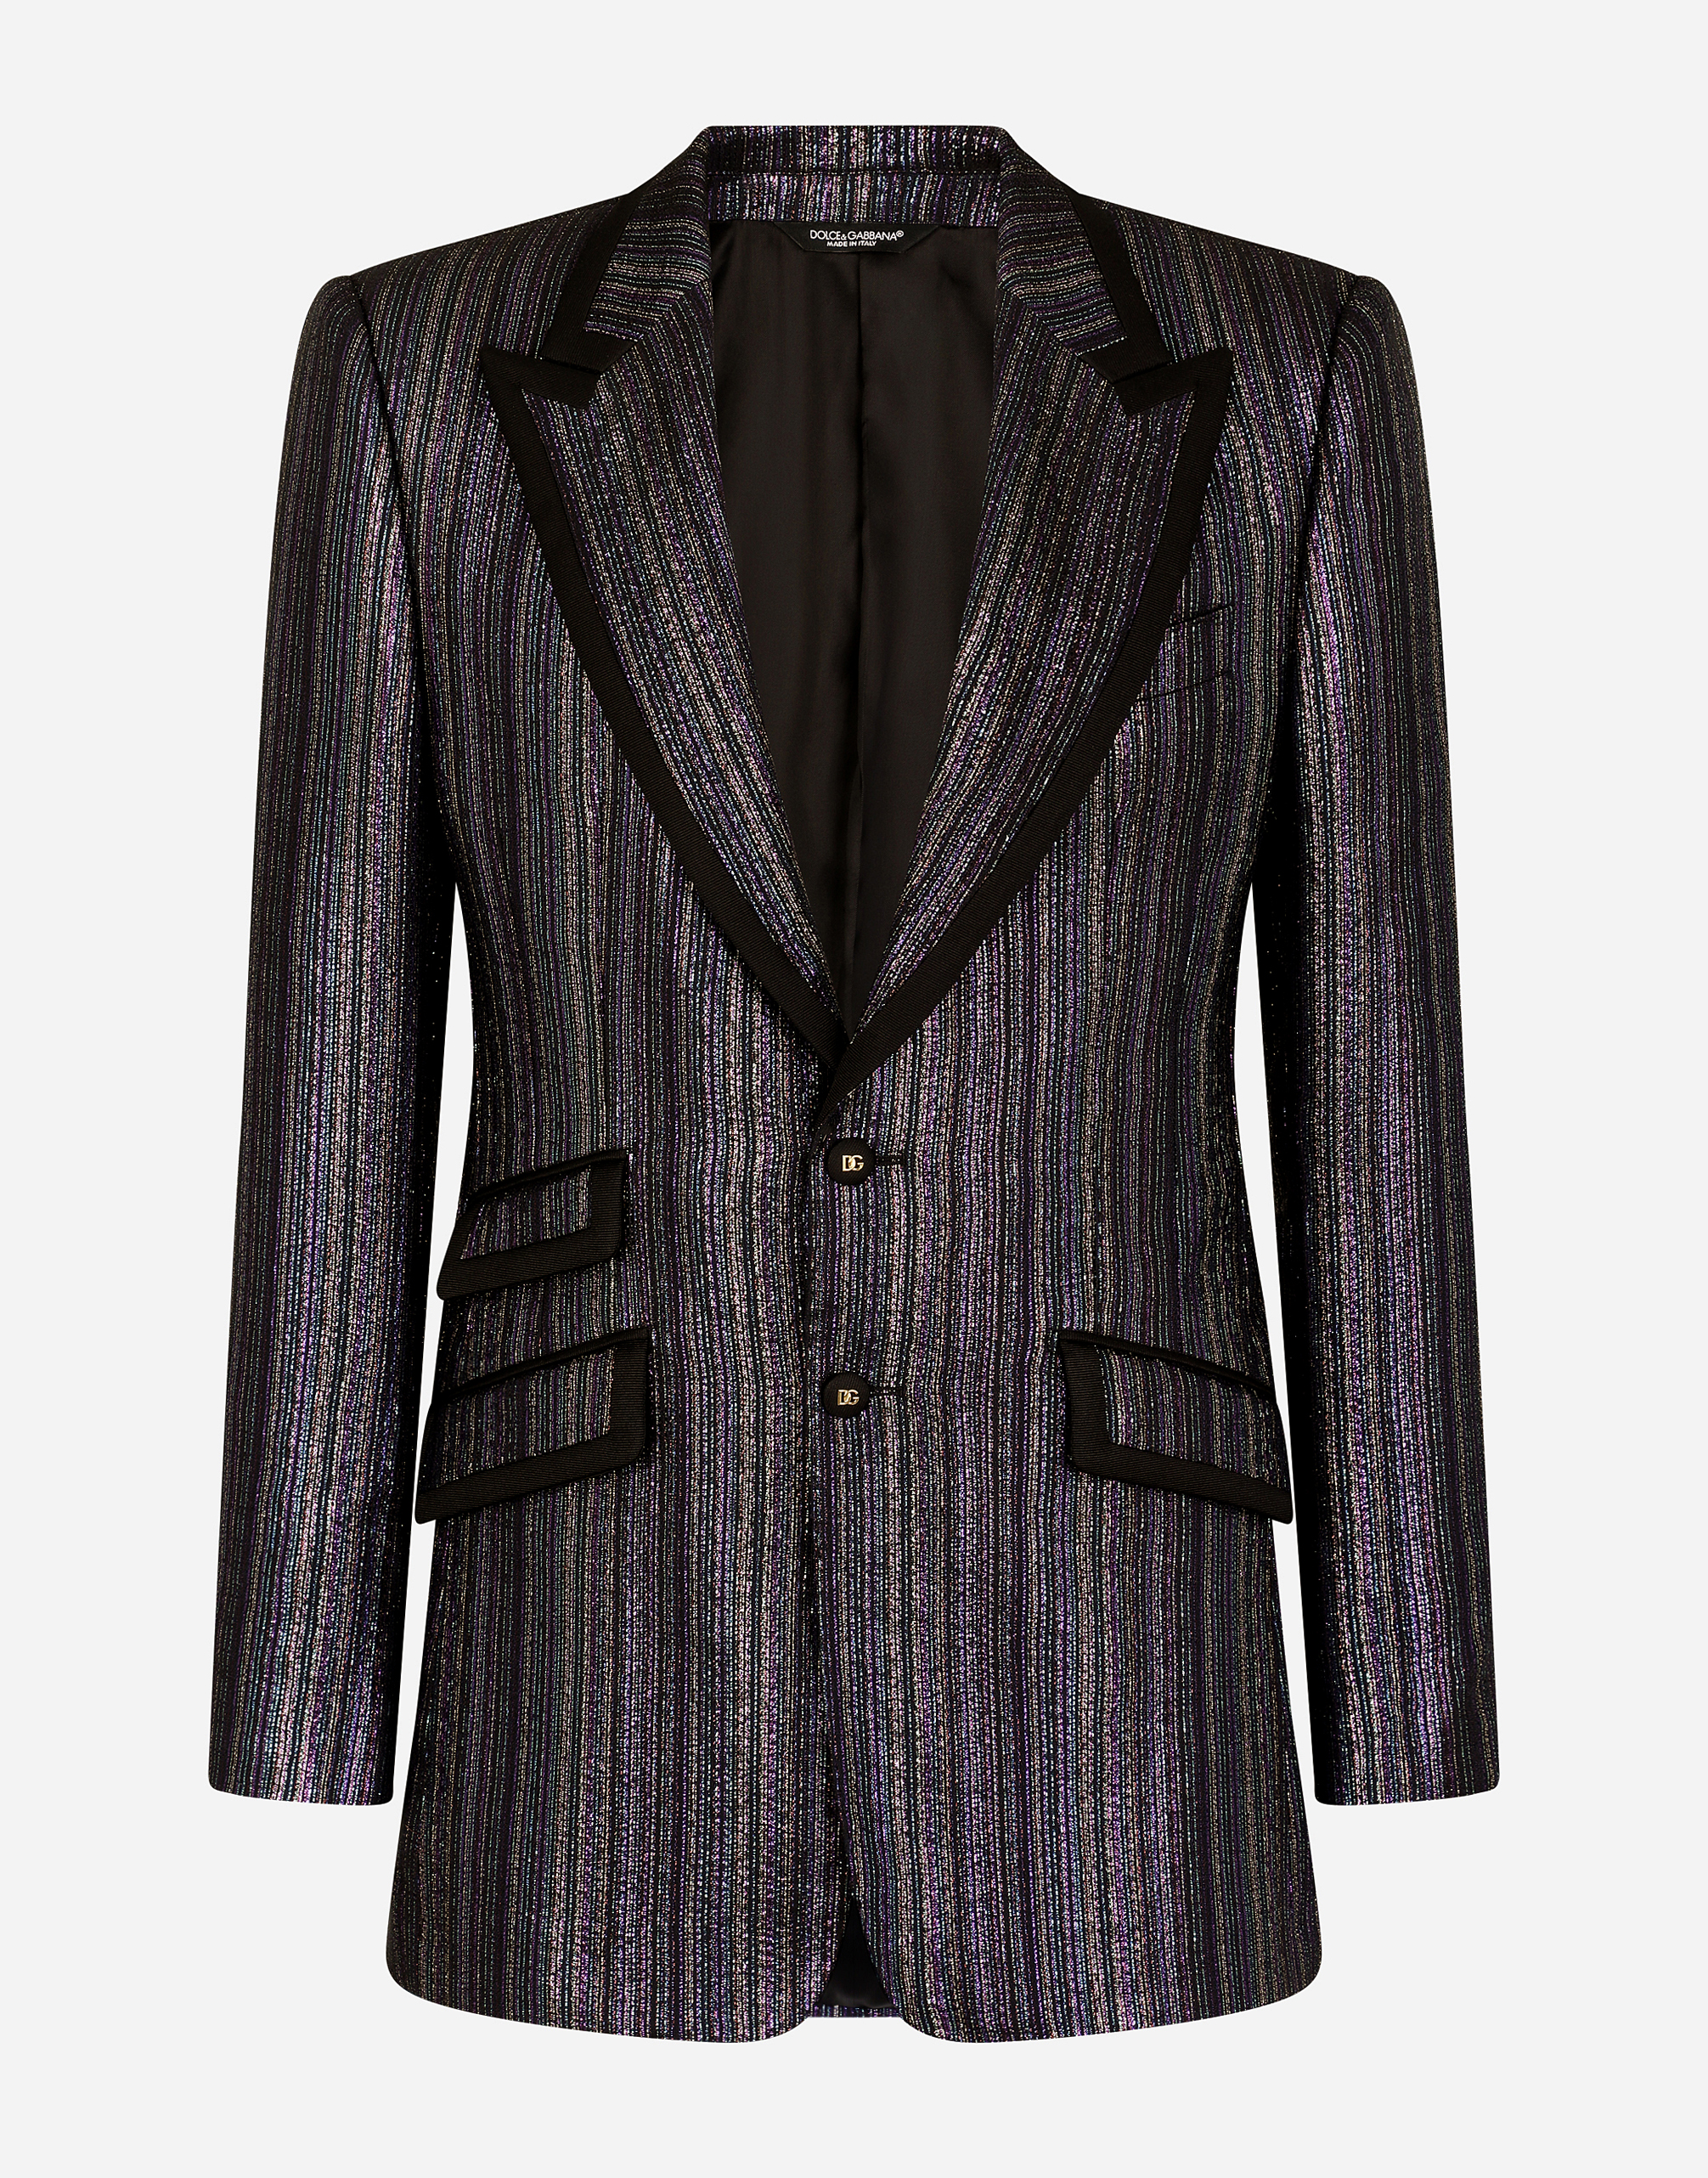 Striped lurex jacquard Beat-fit jacket in Multicolor